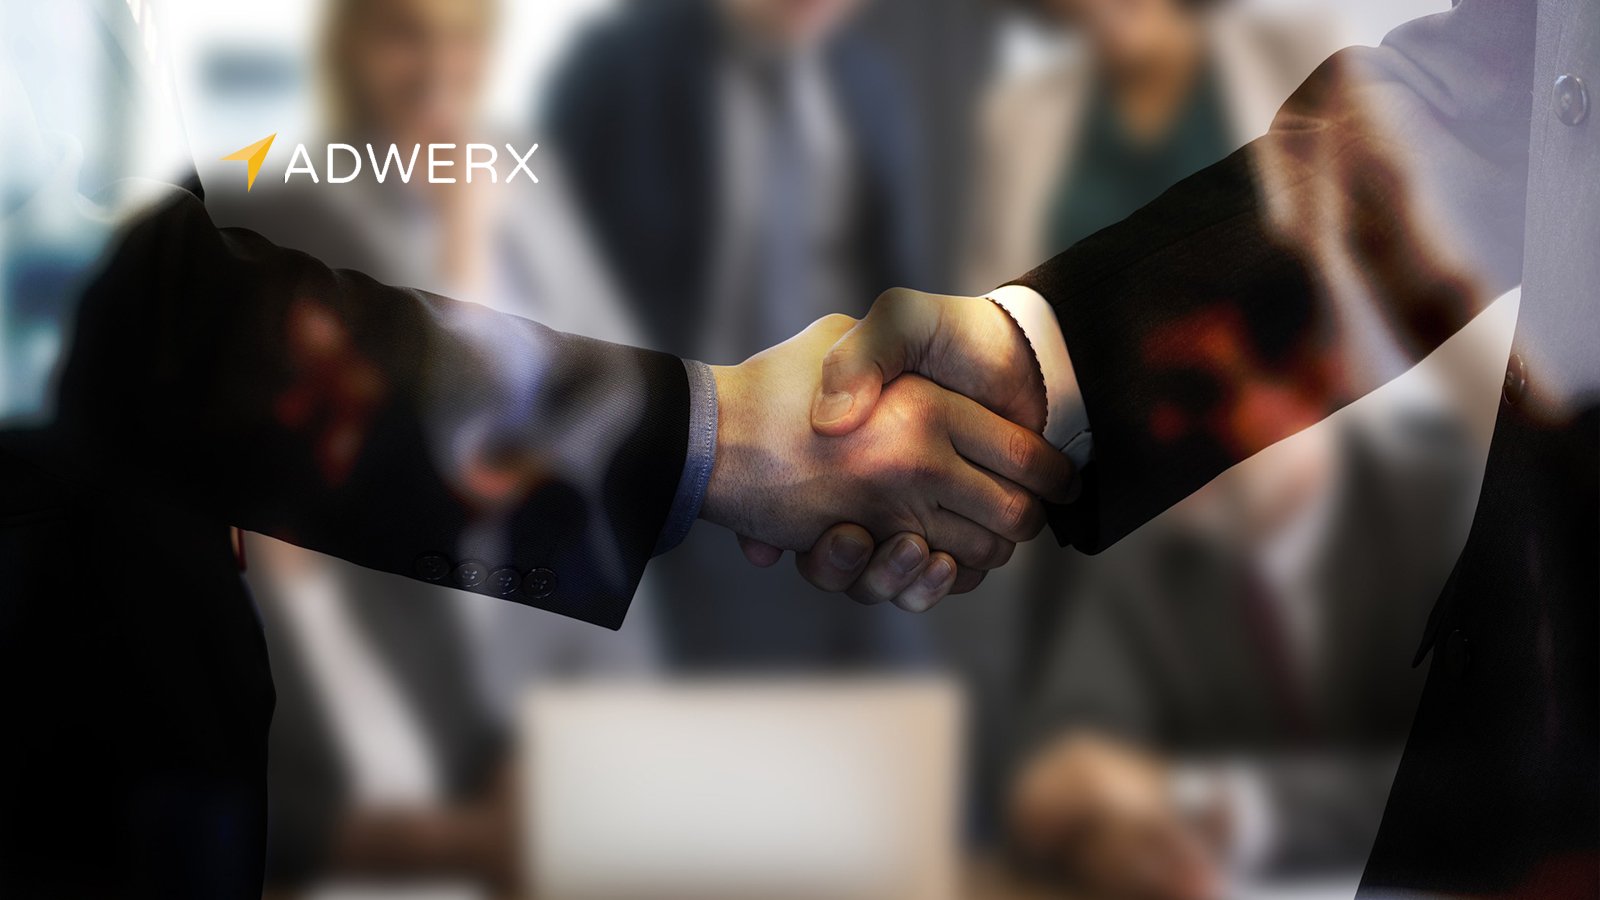 Lake and Hills Realty Chooses Adwerx to Power Digital Brand Ads for its Agents